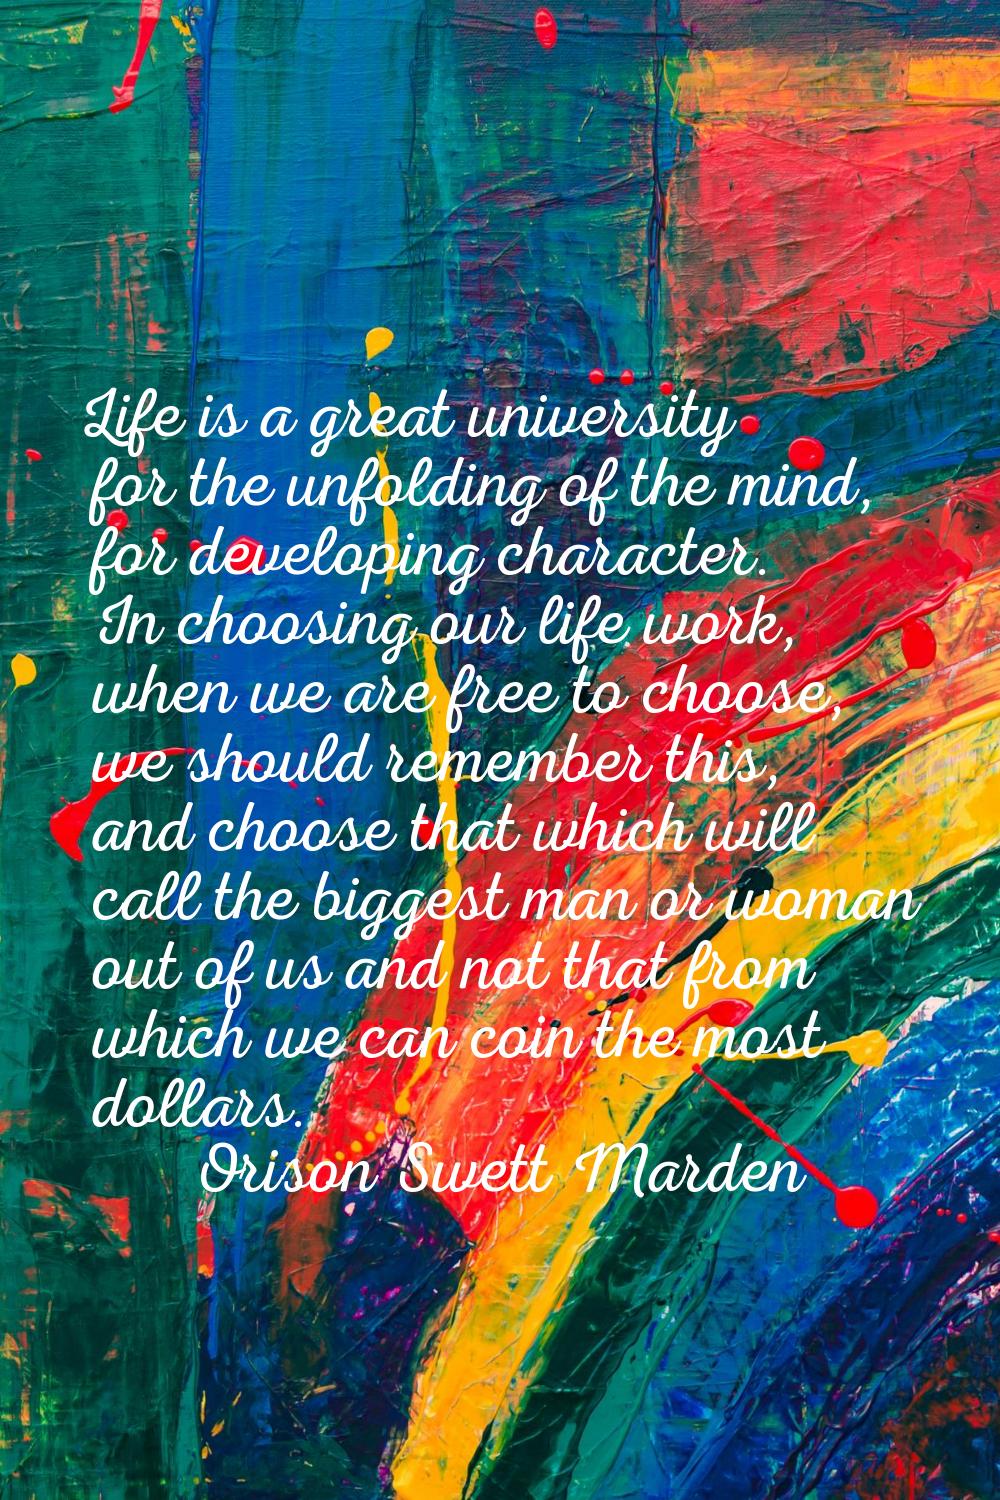 Life is a great university for the unfolding of the mind, for developing character. In choosing our